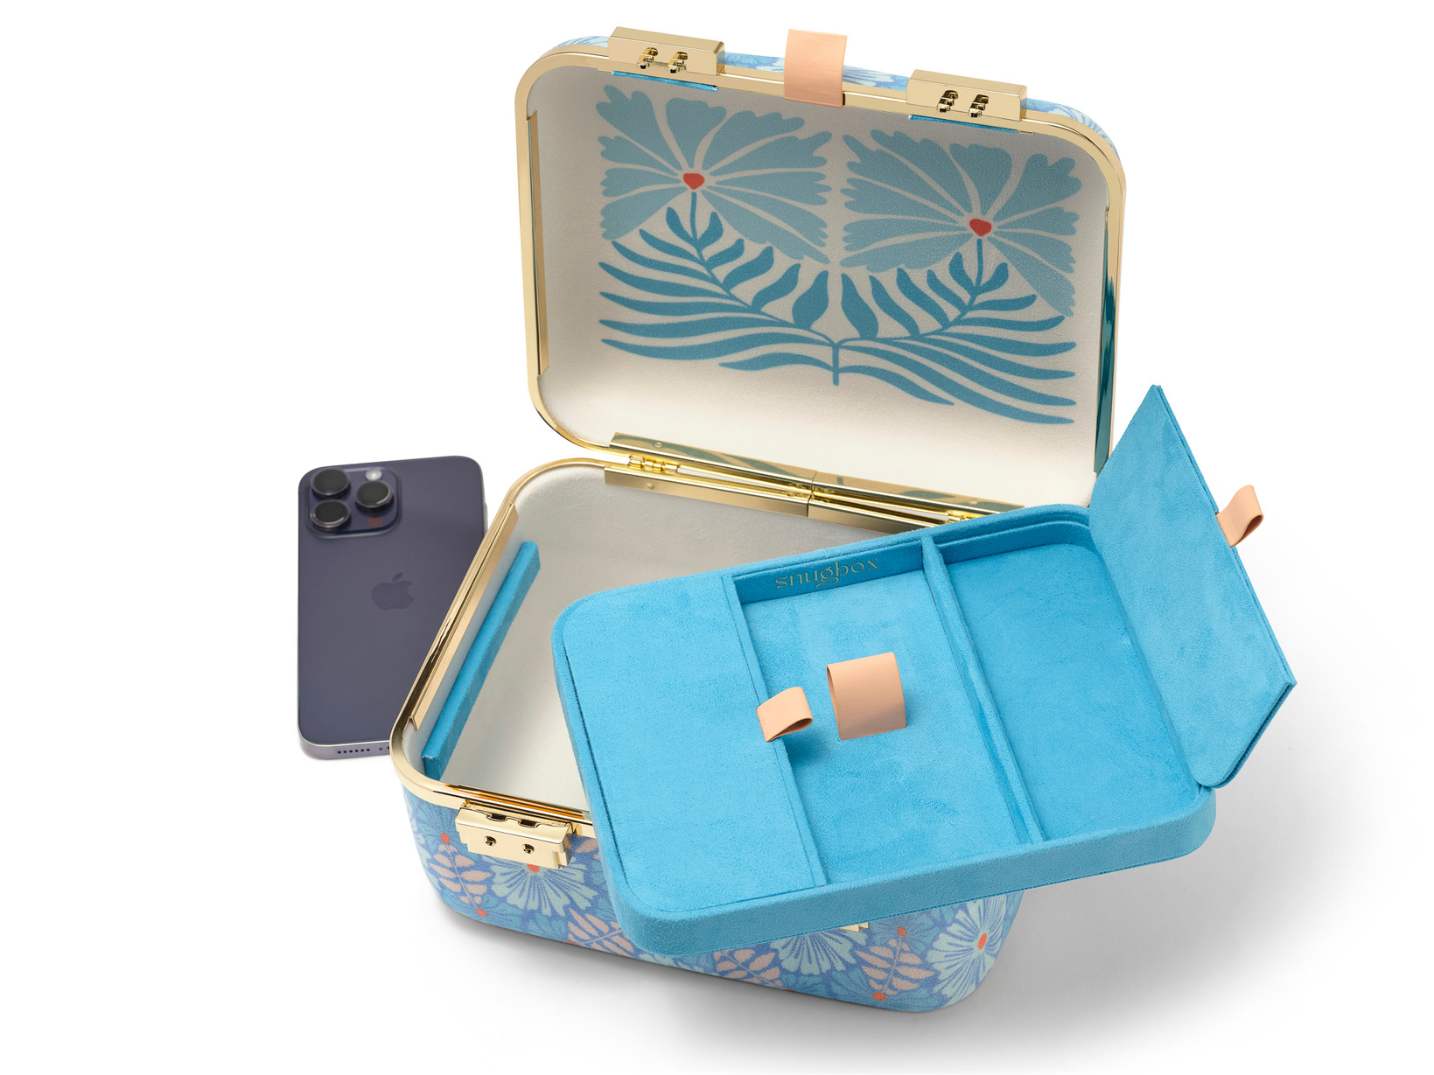 Snugbox is a lockbox for whatever your thing. Including weed, in case you&